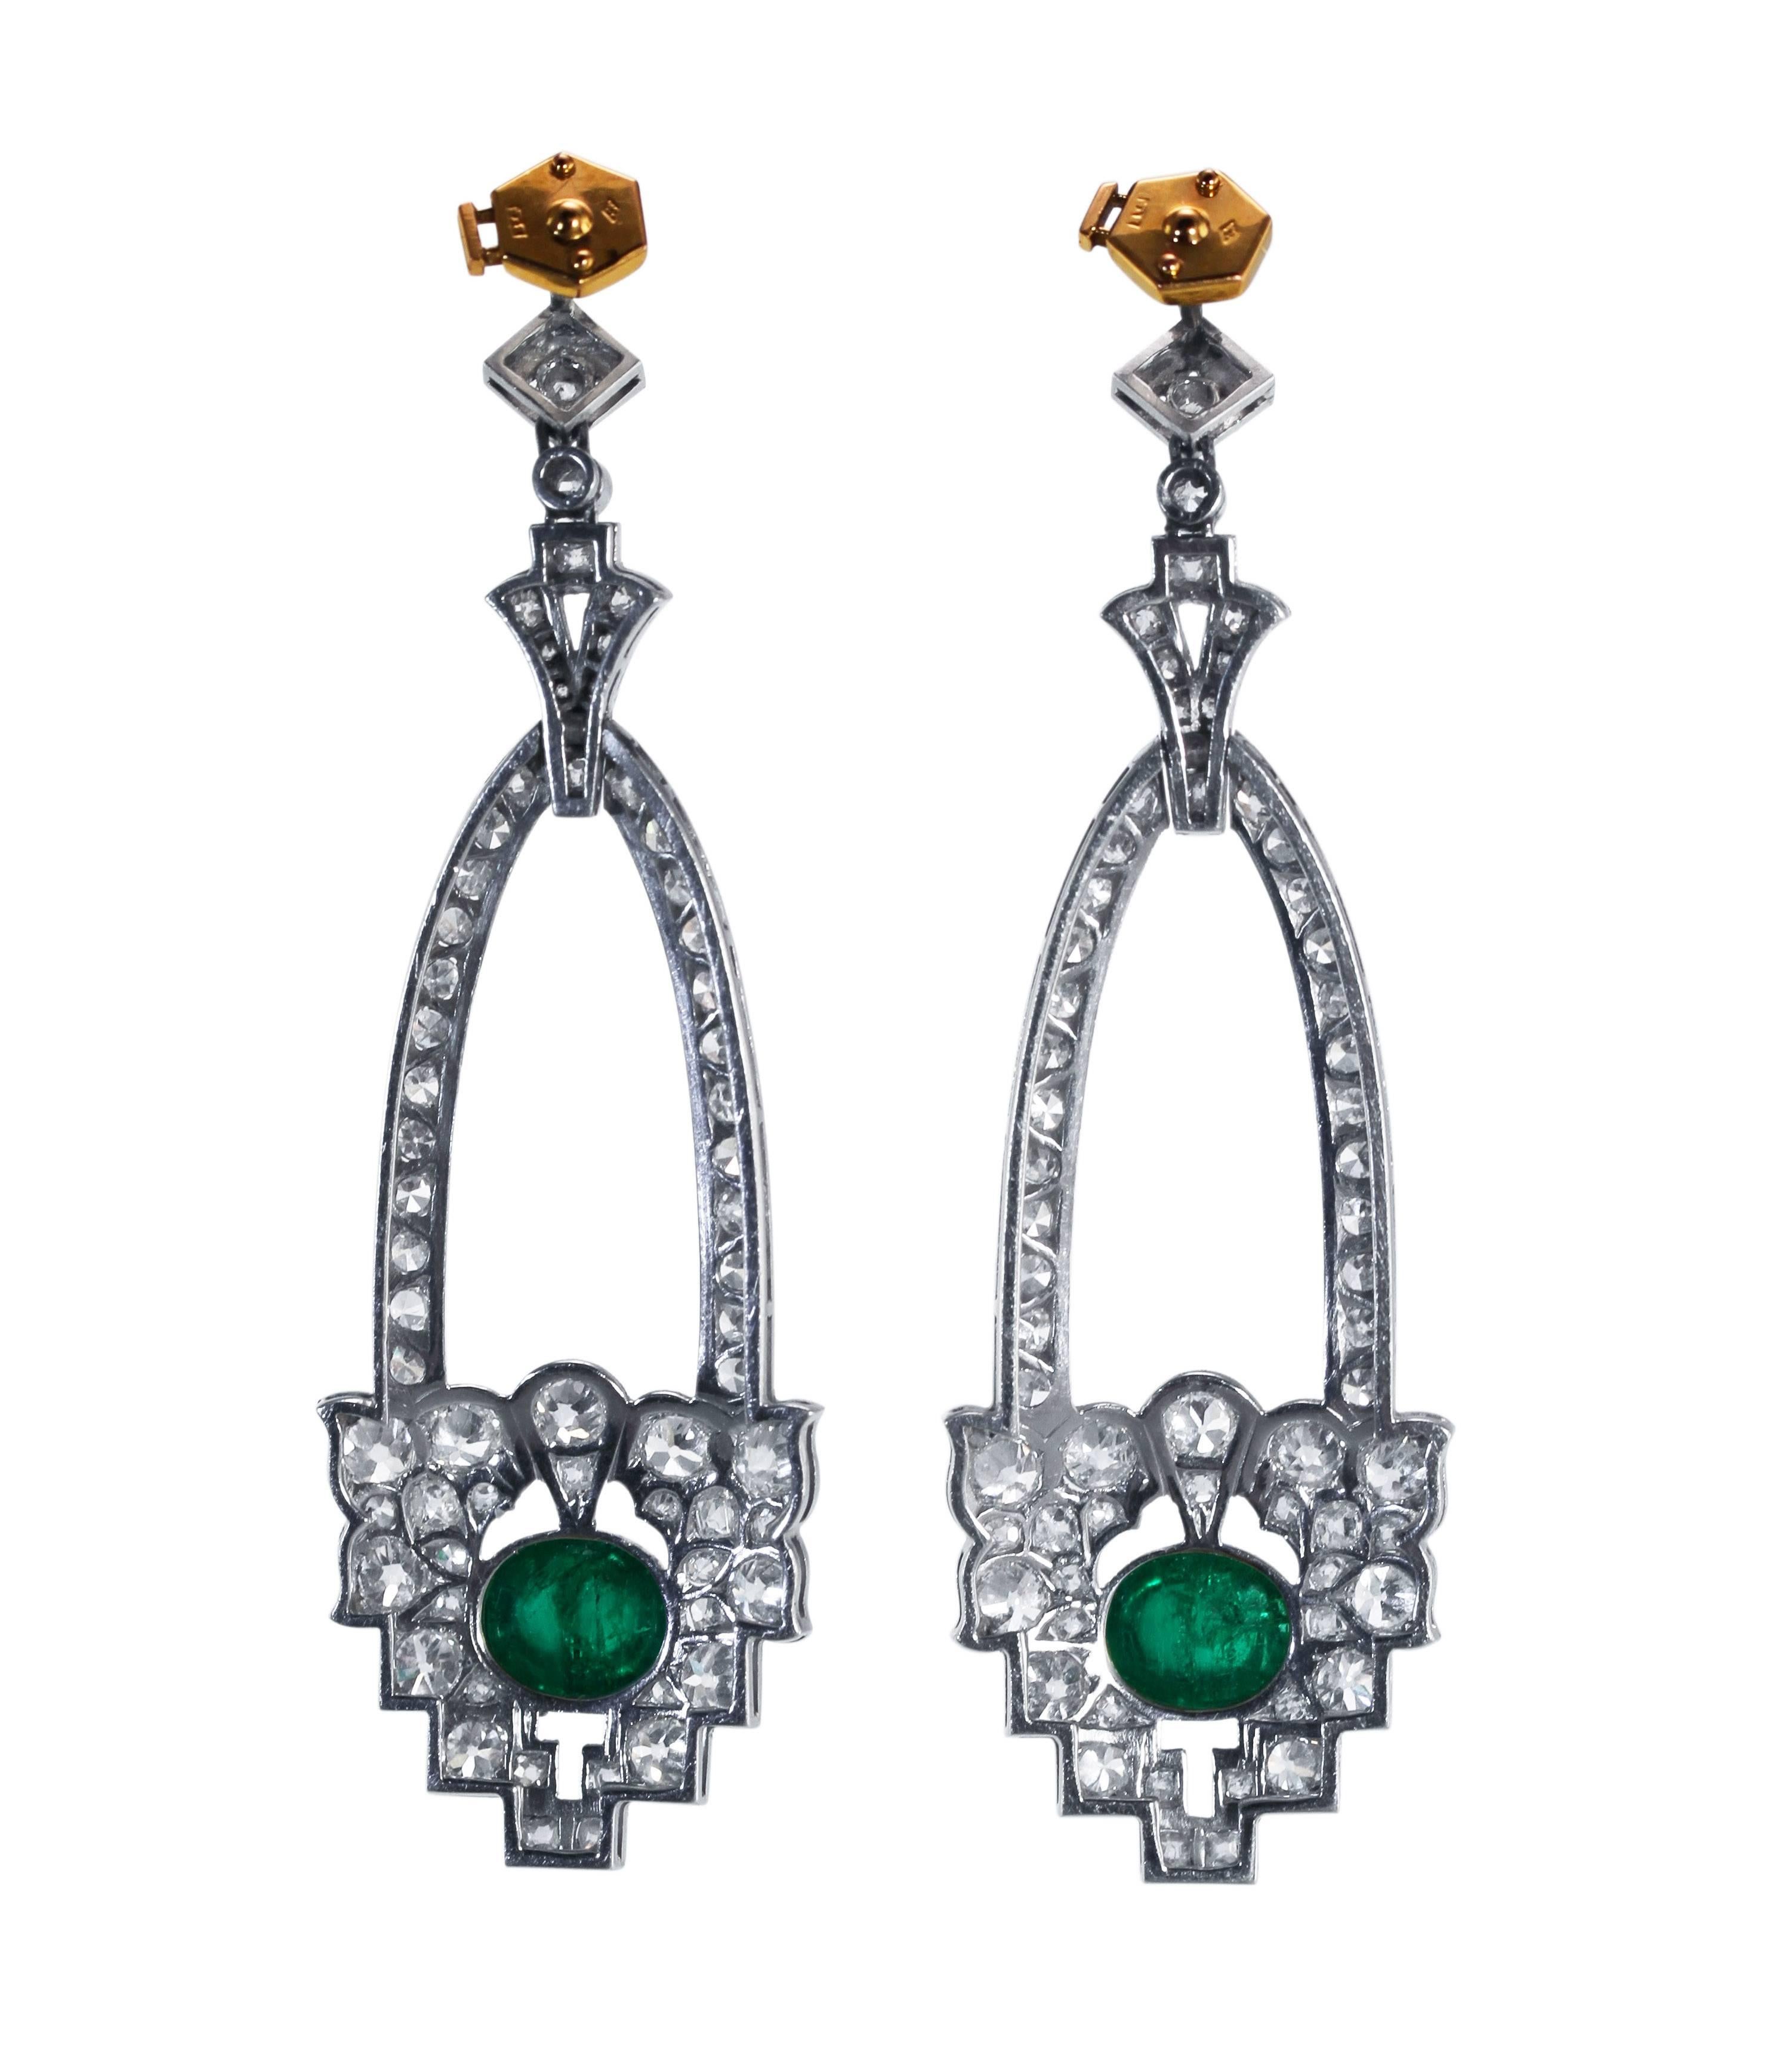 A pair of Art Deco platinum, emerald and diamond earrings, designed as openwork geometric style pendants set at the bottom with 2 cabochon emeralds weighing approximately 4.50 carats, further set with 26 old round diamonds weighing approximately